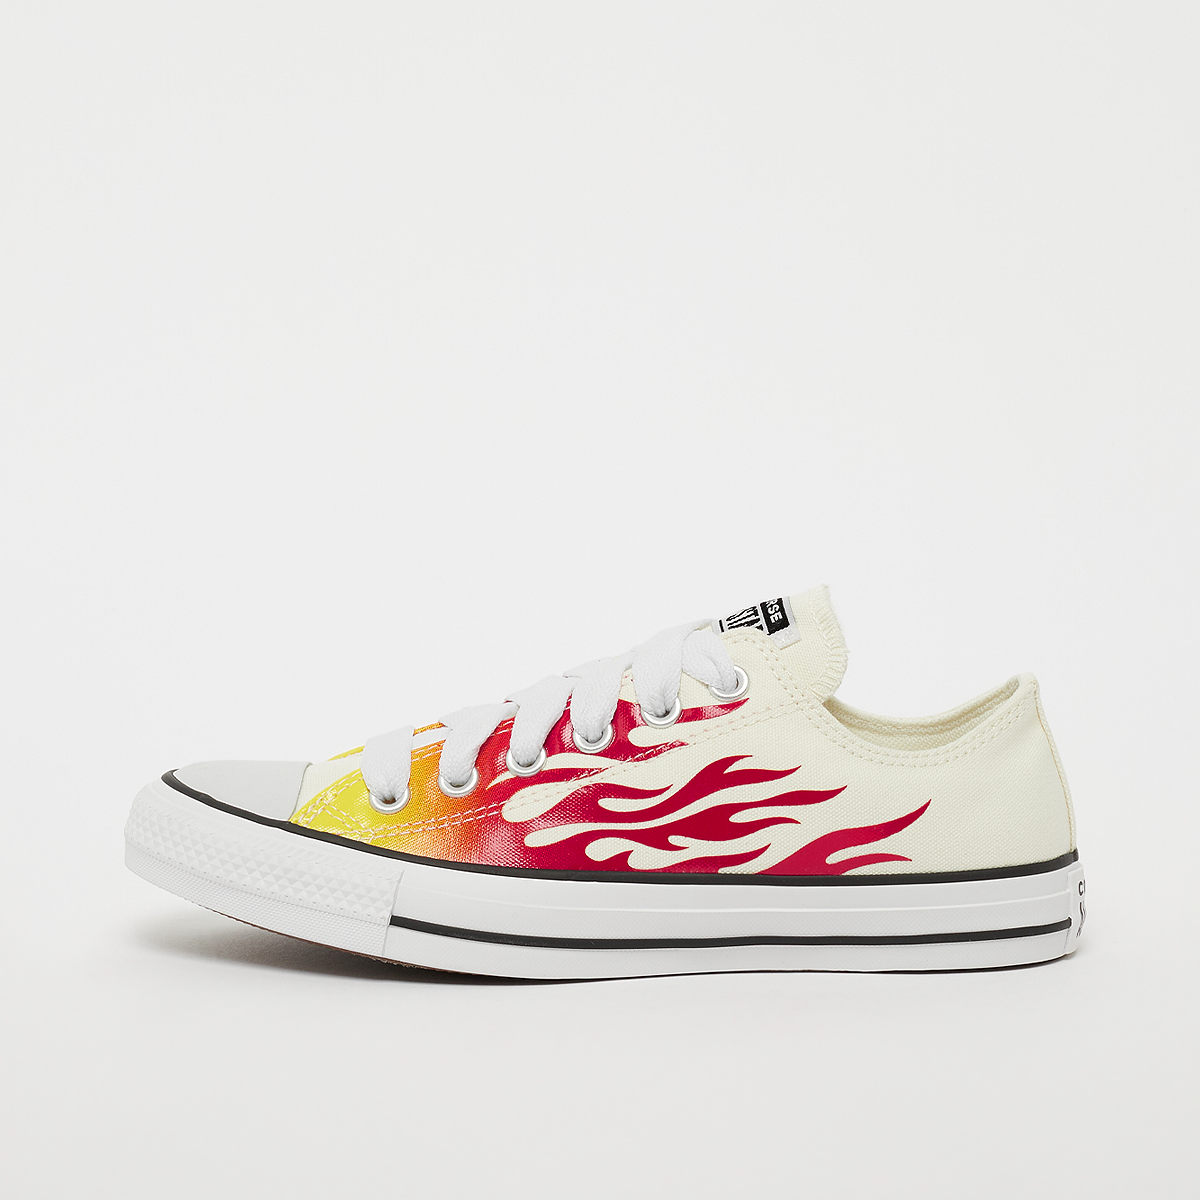 Chuck Taylor All Star, Converse, Footwear, egret/enamel red/fresh yellow, taille: 39